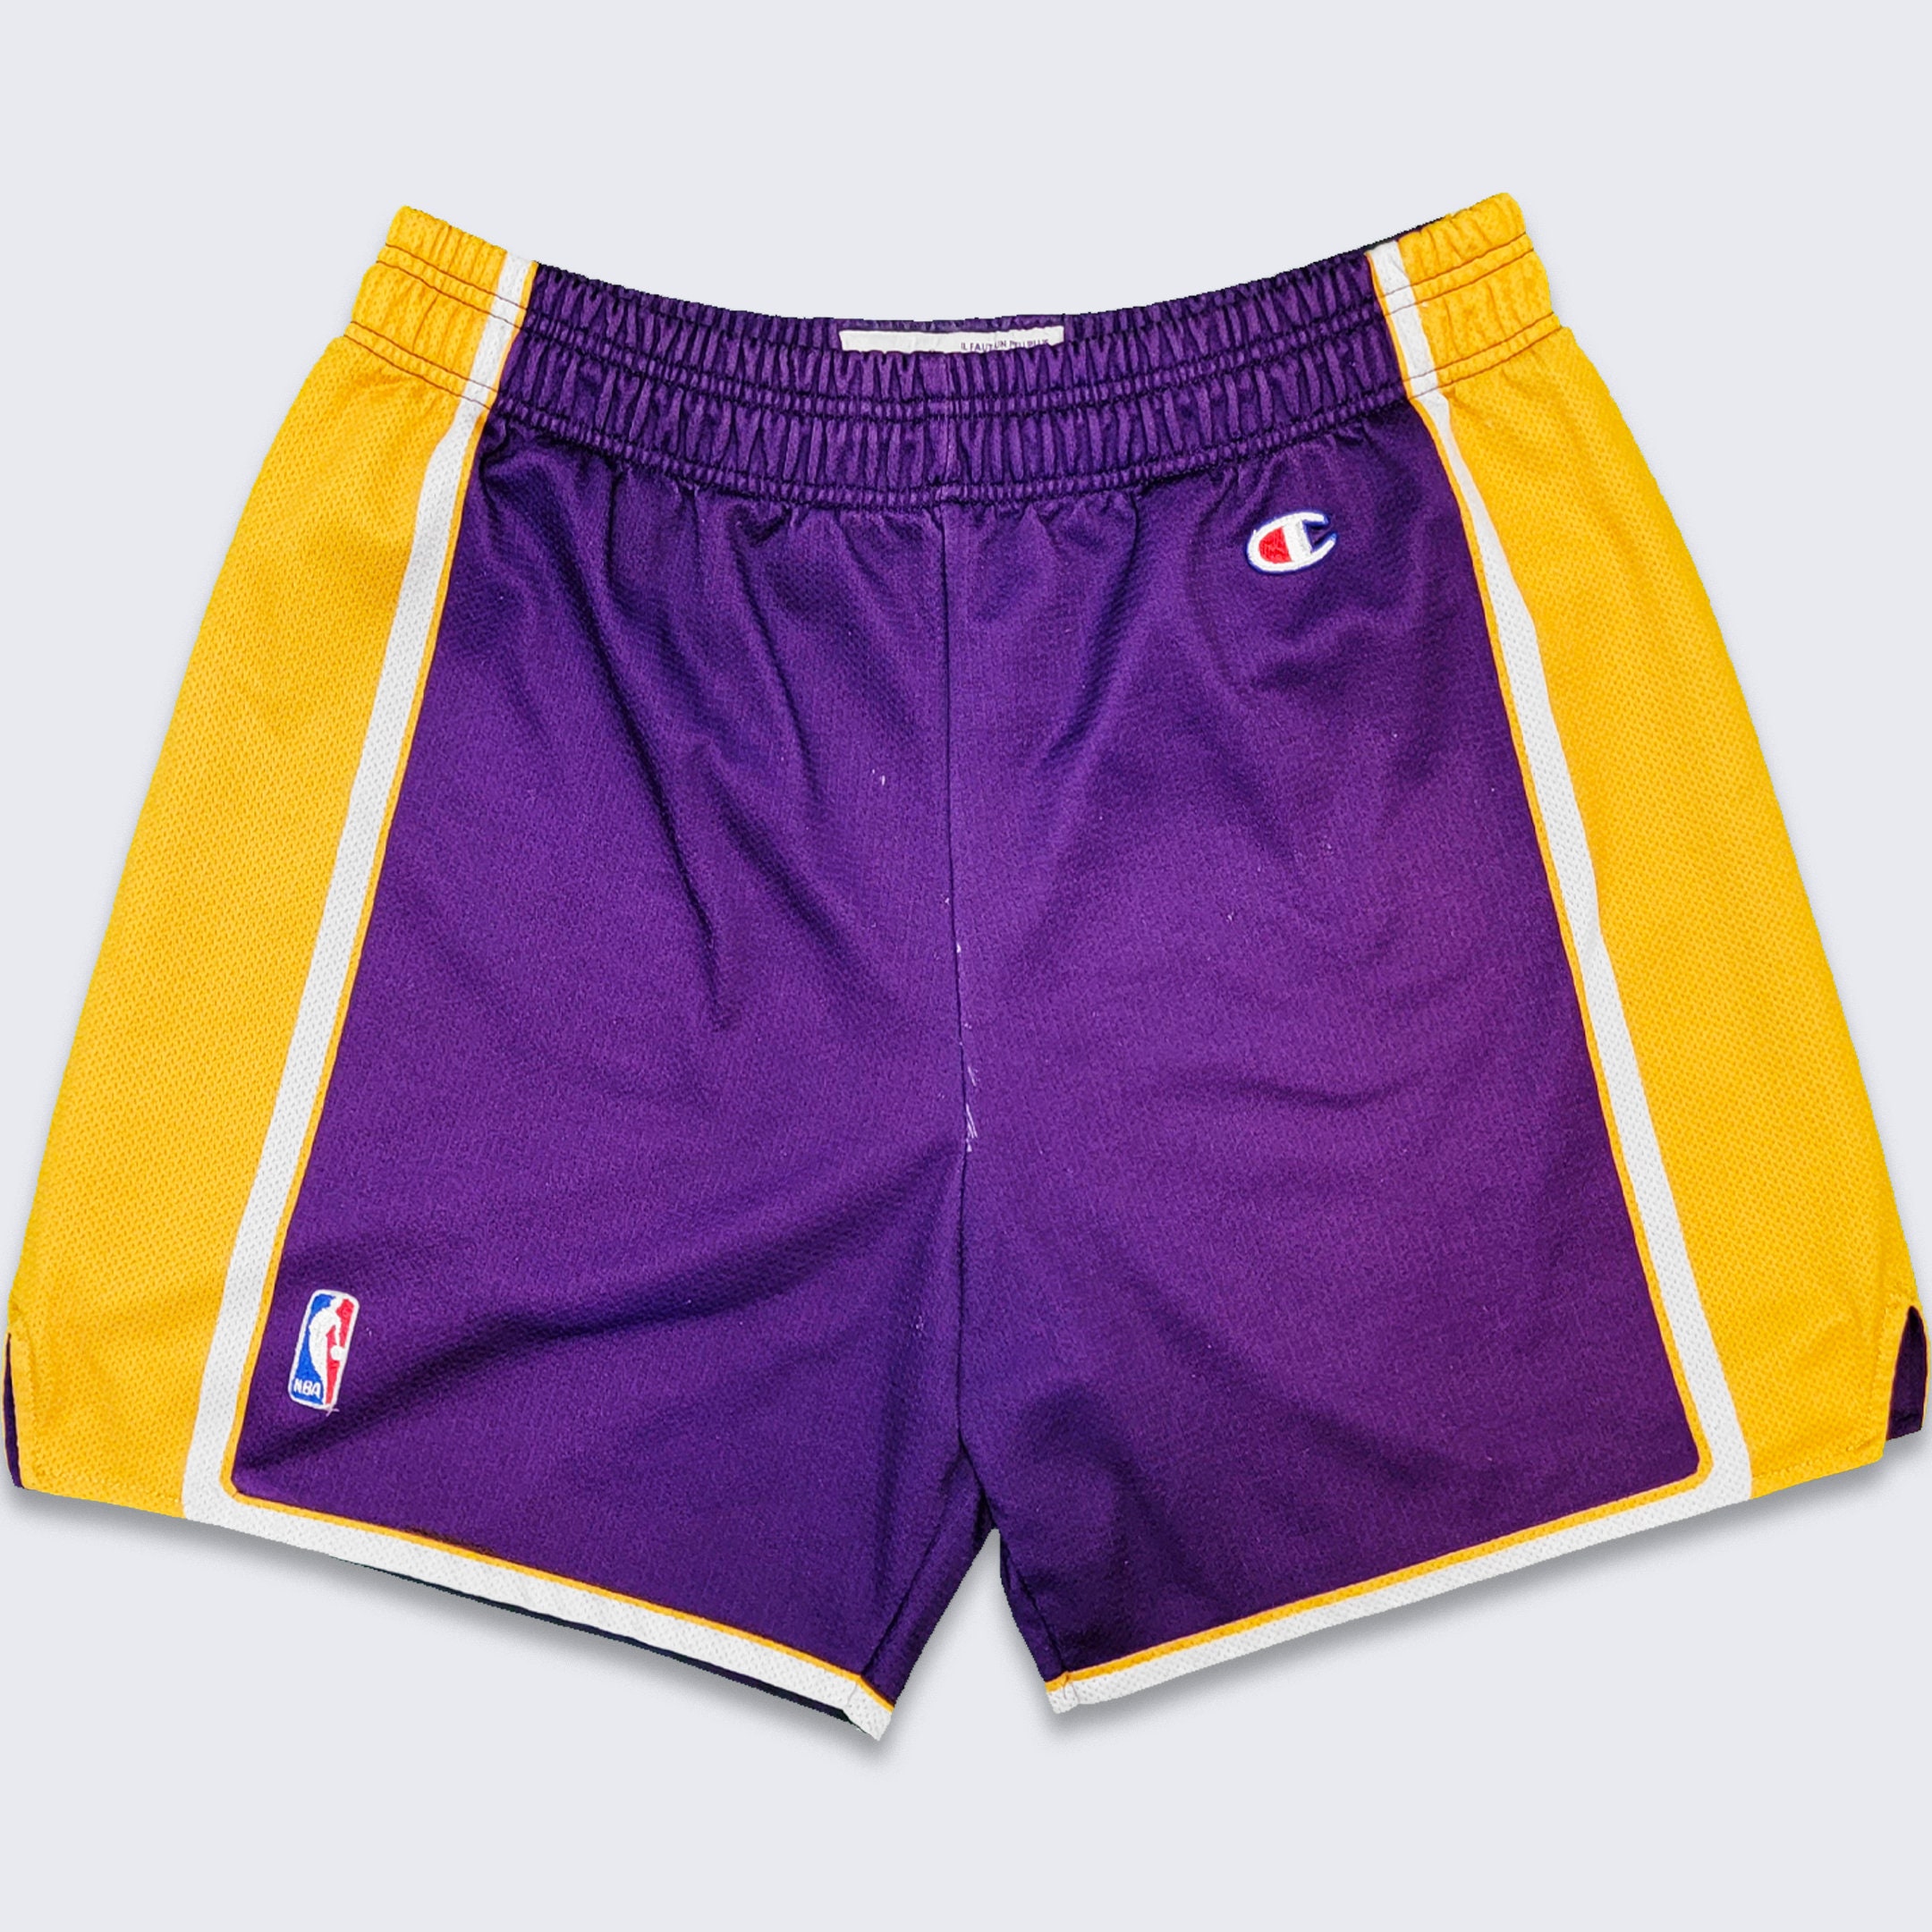 Retro Los Angeles Lakers Basketball Shorts Stitched Purple 